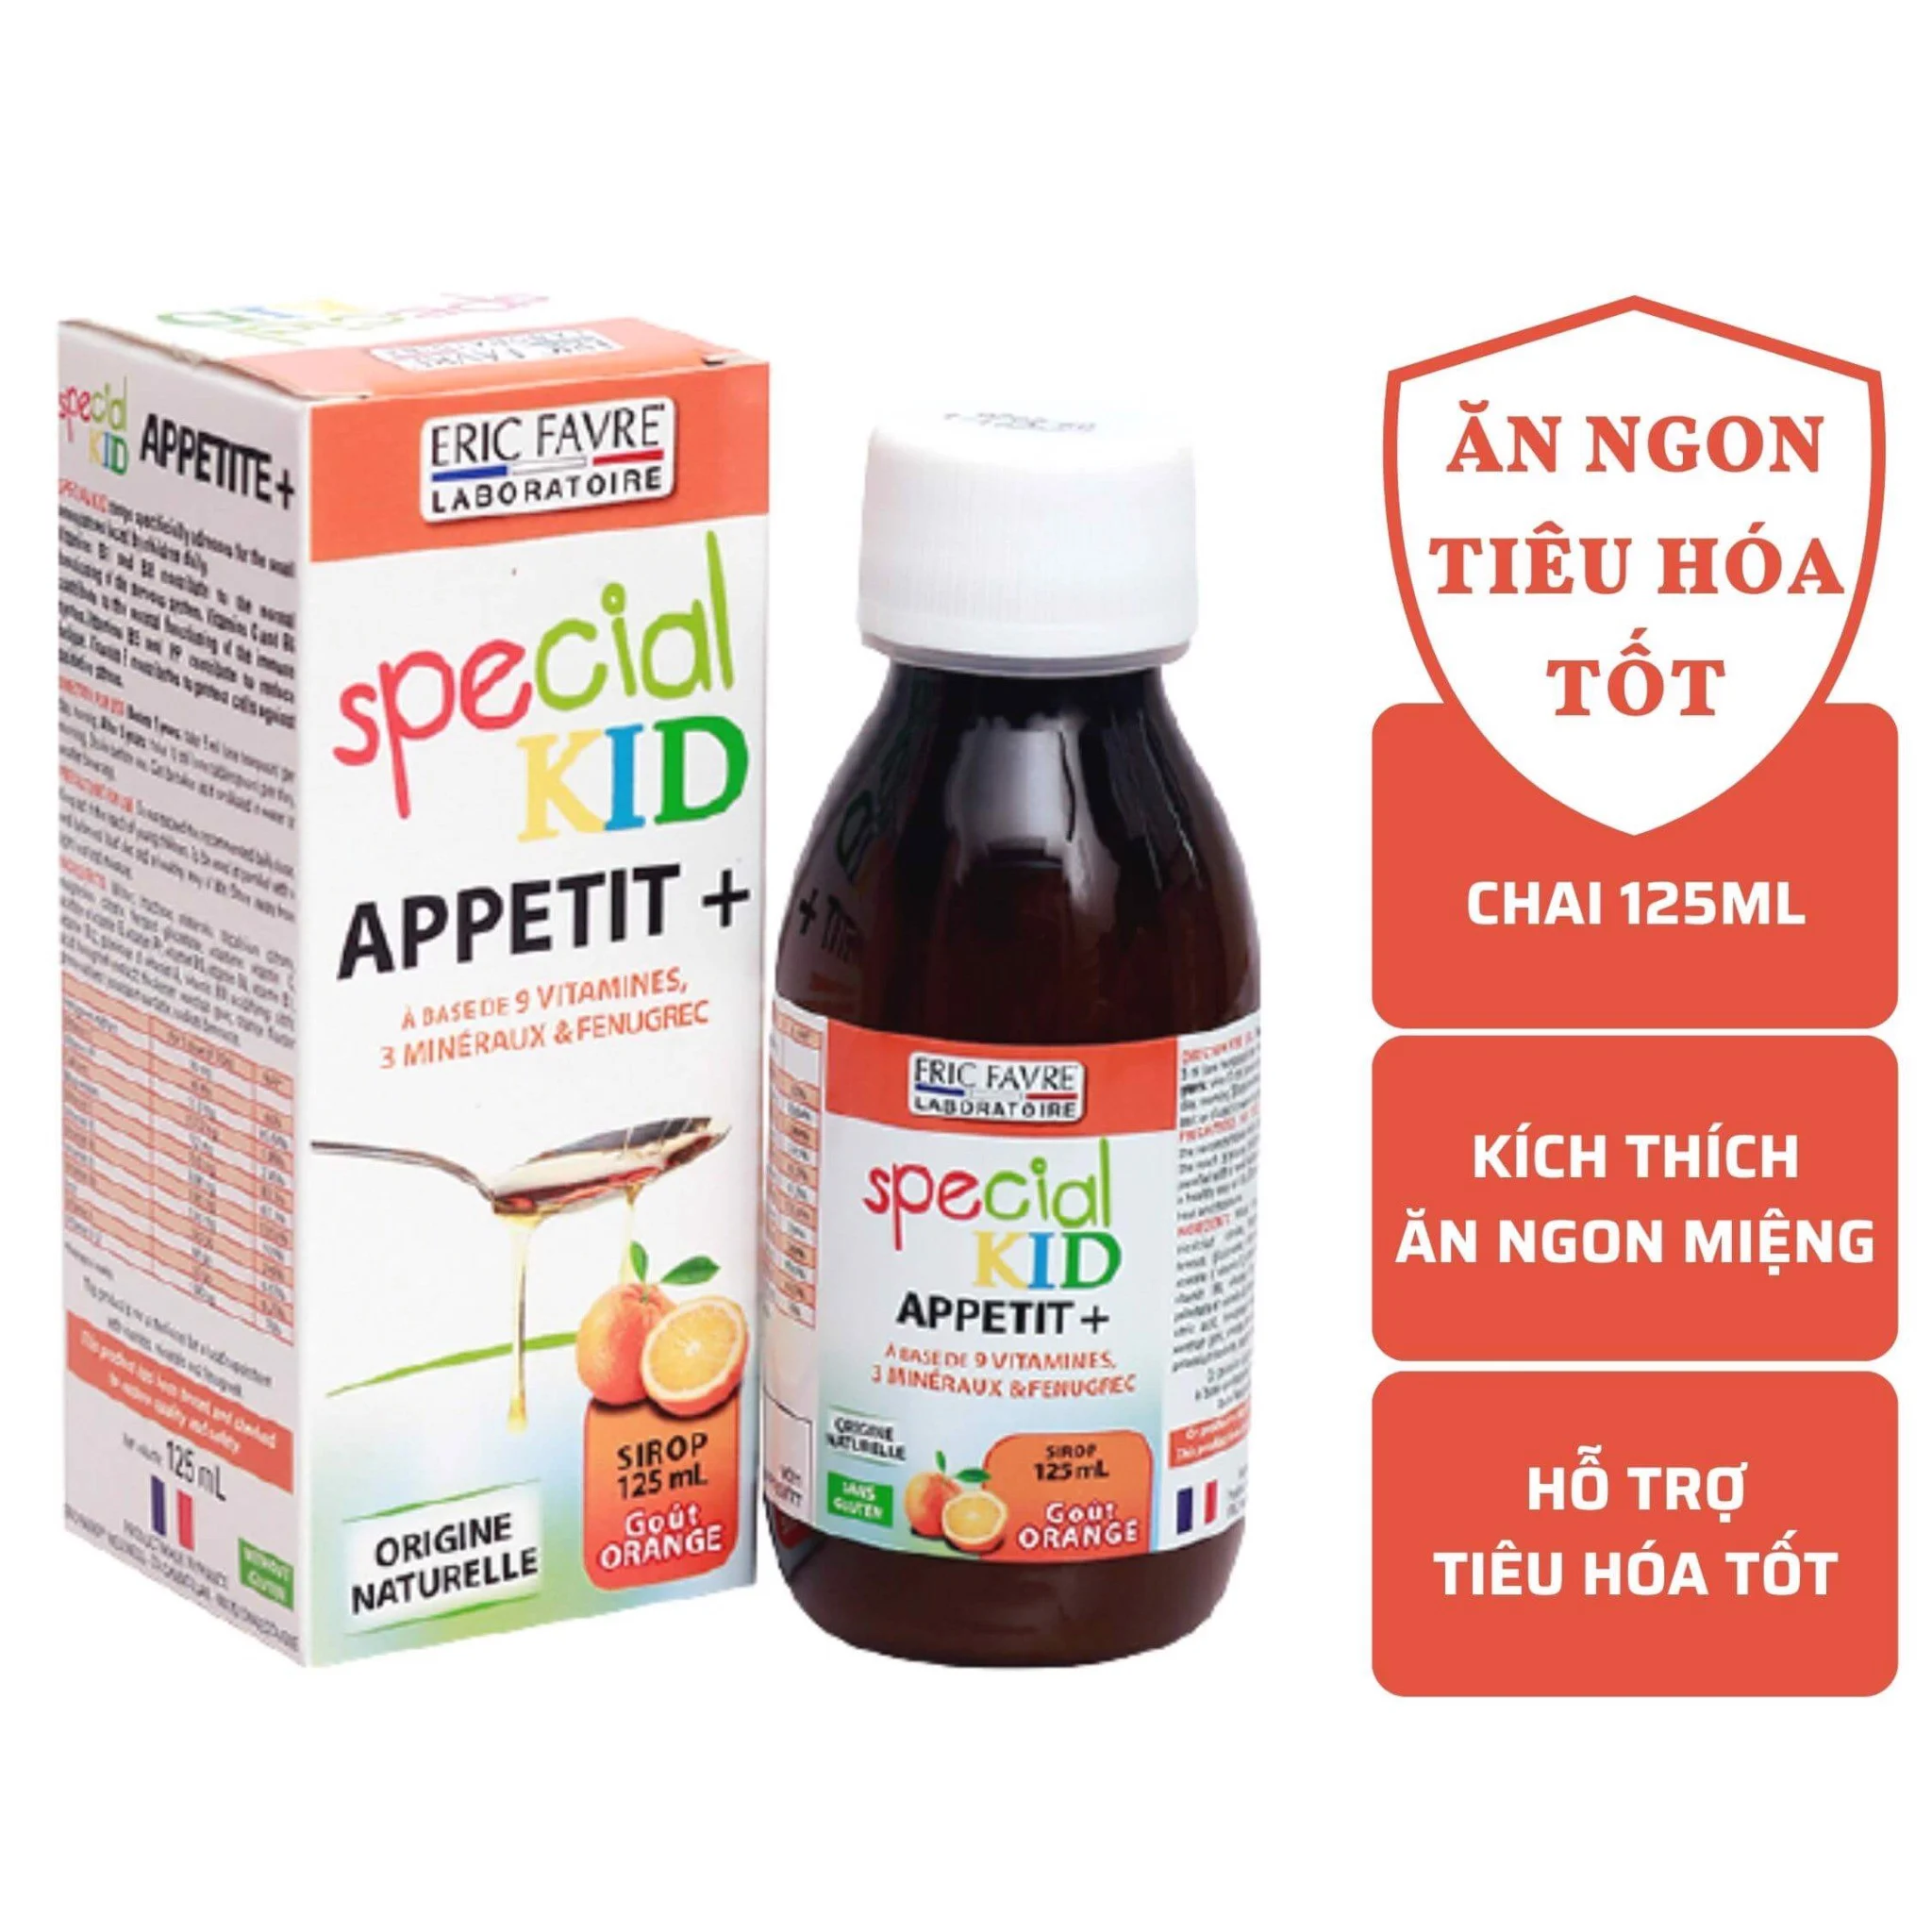 SPECIAL KID APPETIT + made in France